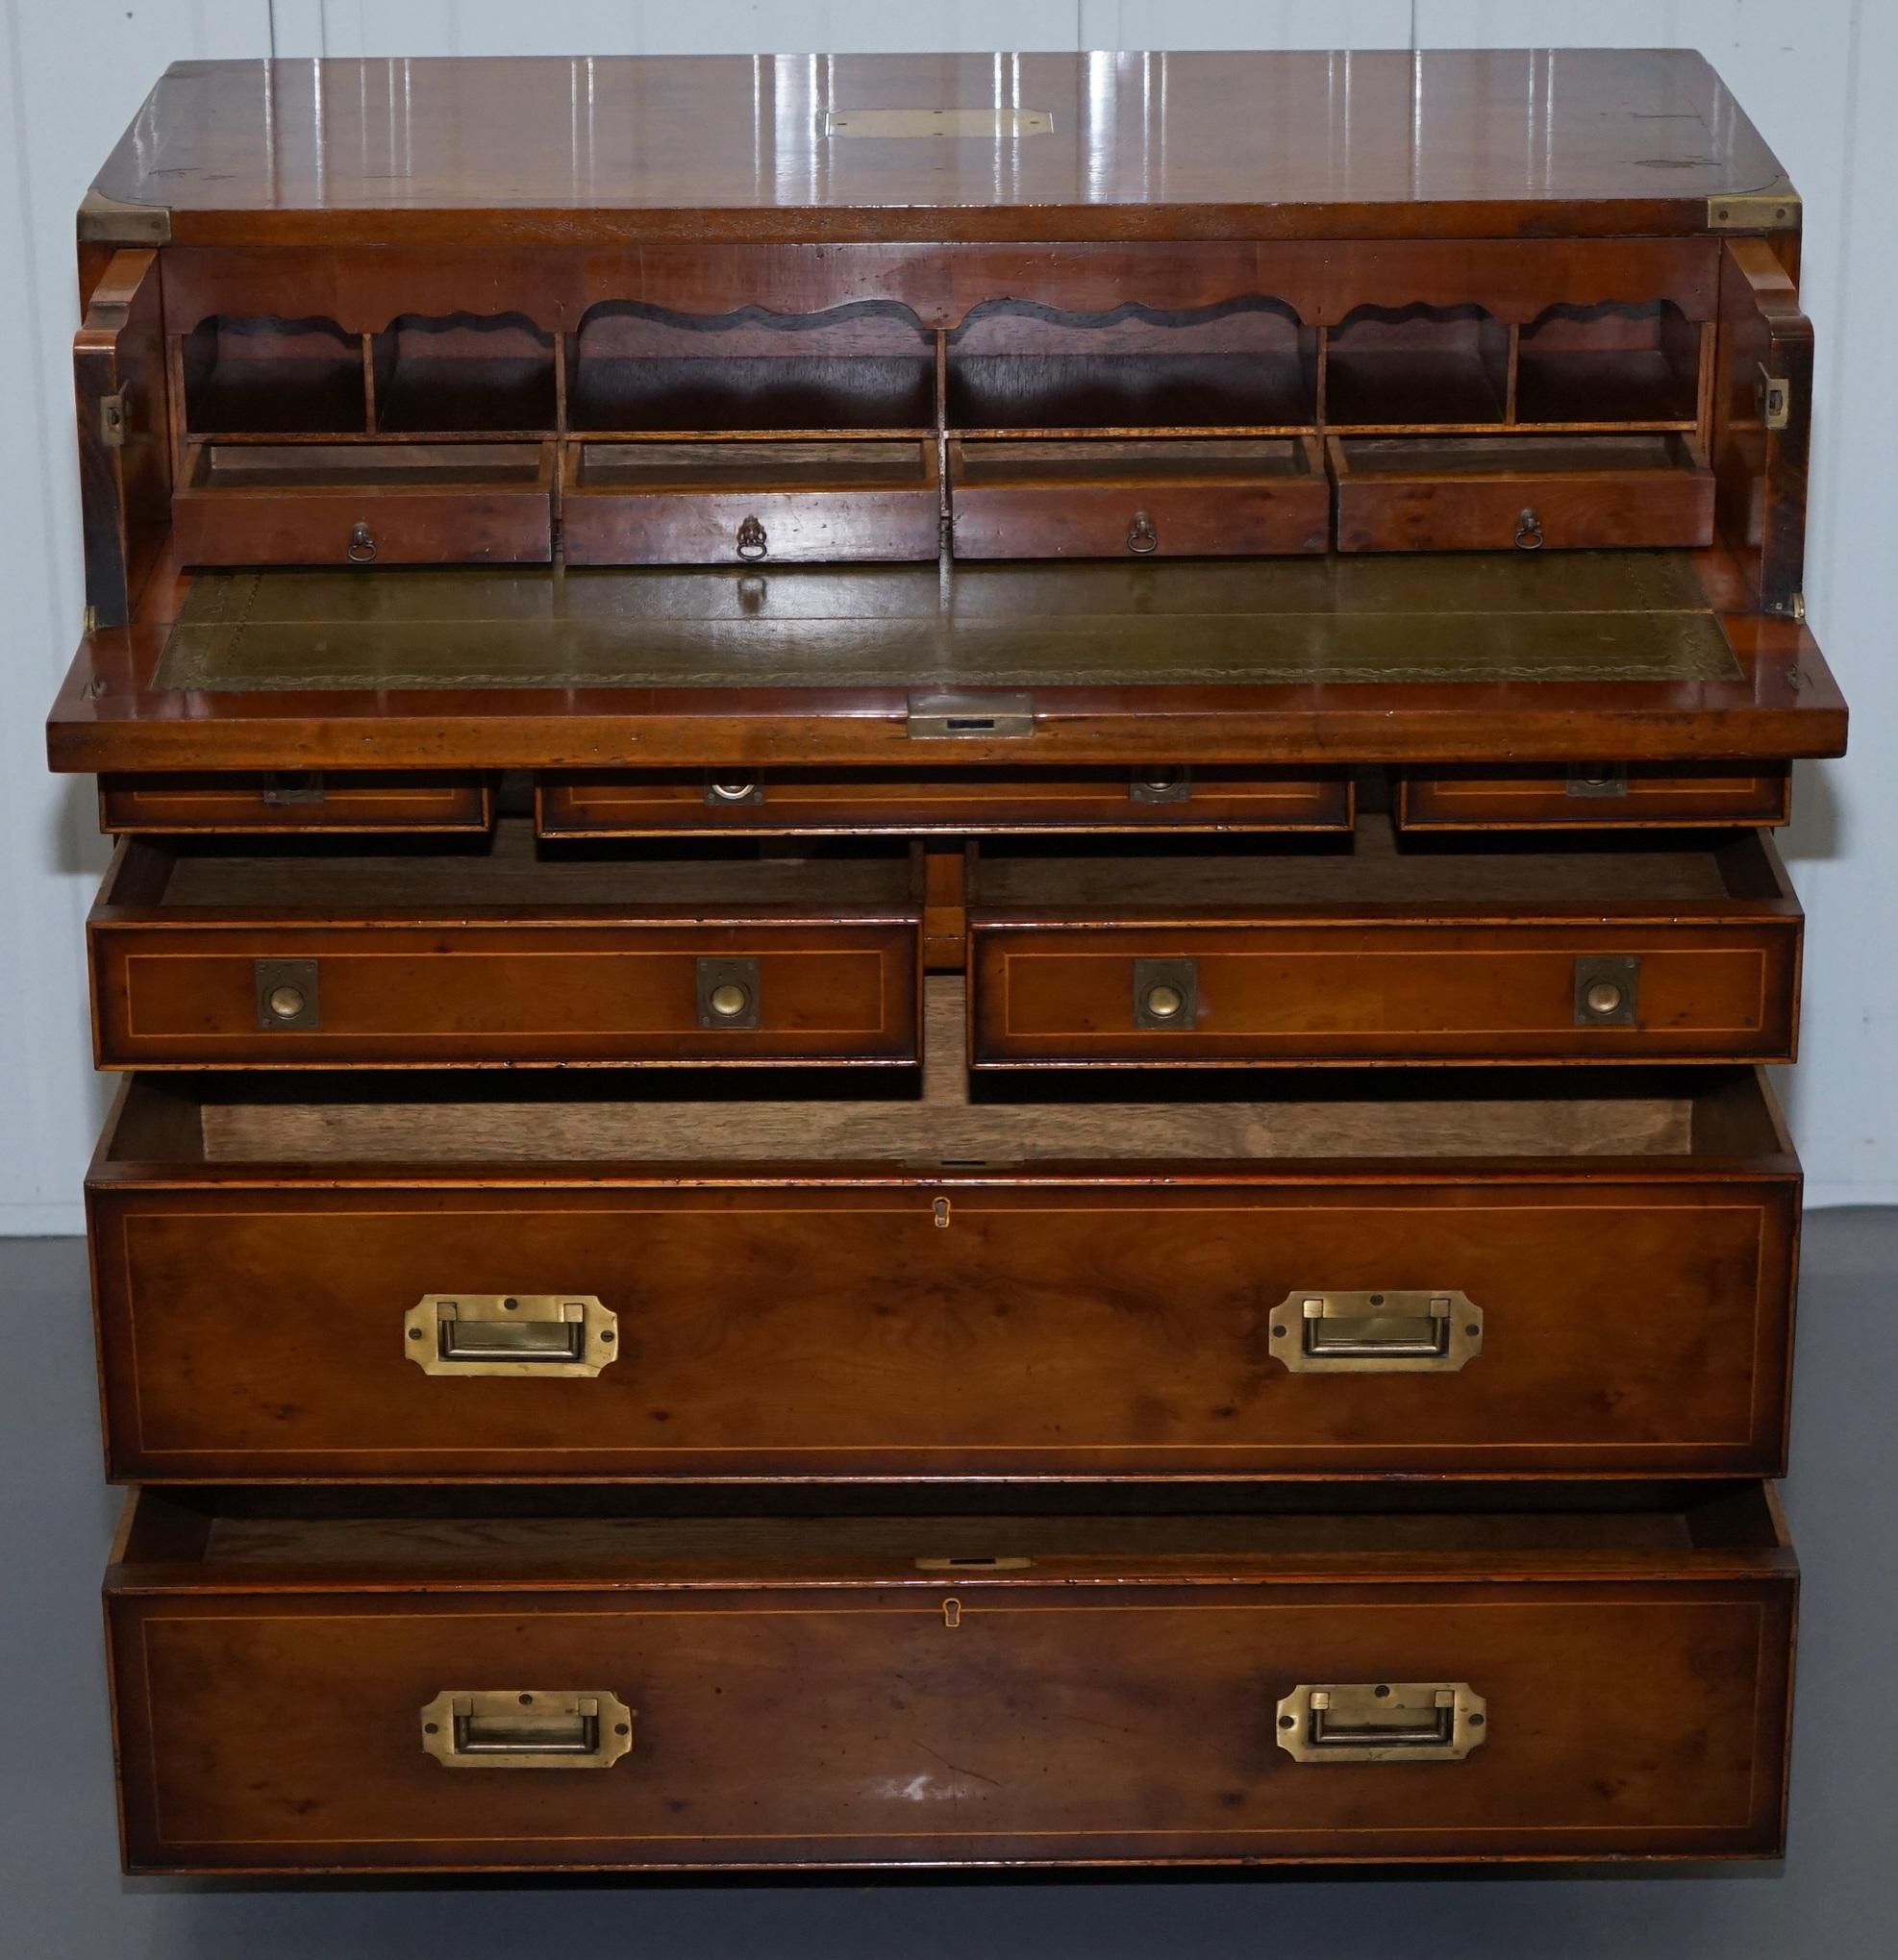 Lovely Burr Yew Wood Military Campaign Chest of Drawers Built in Drop Front Desk 7